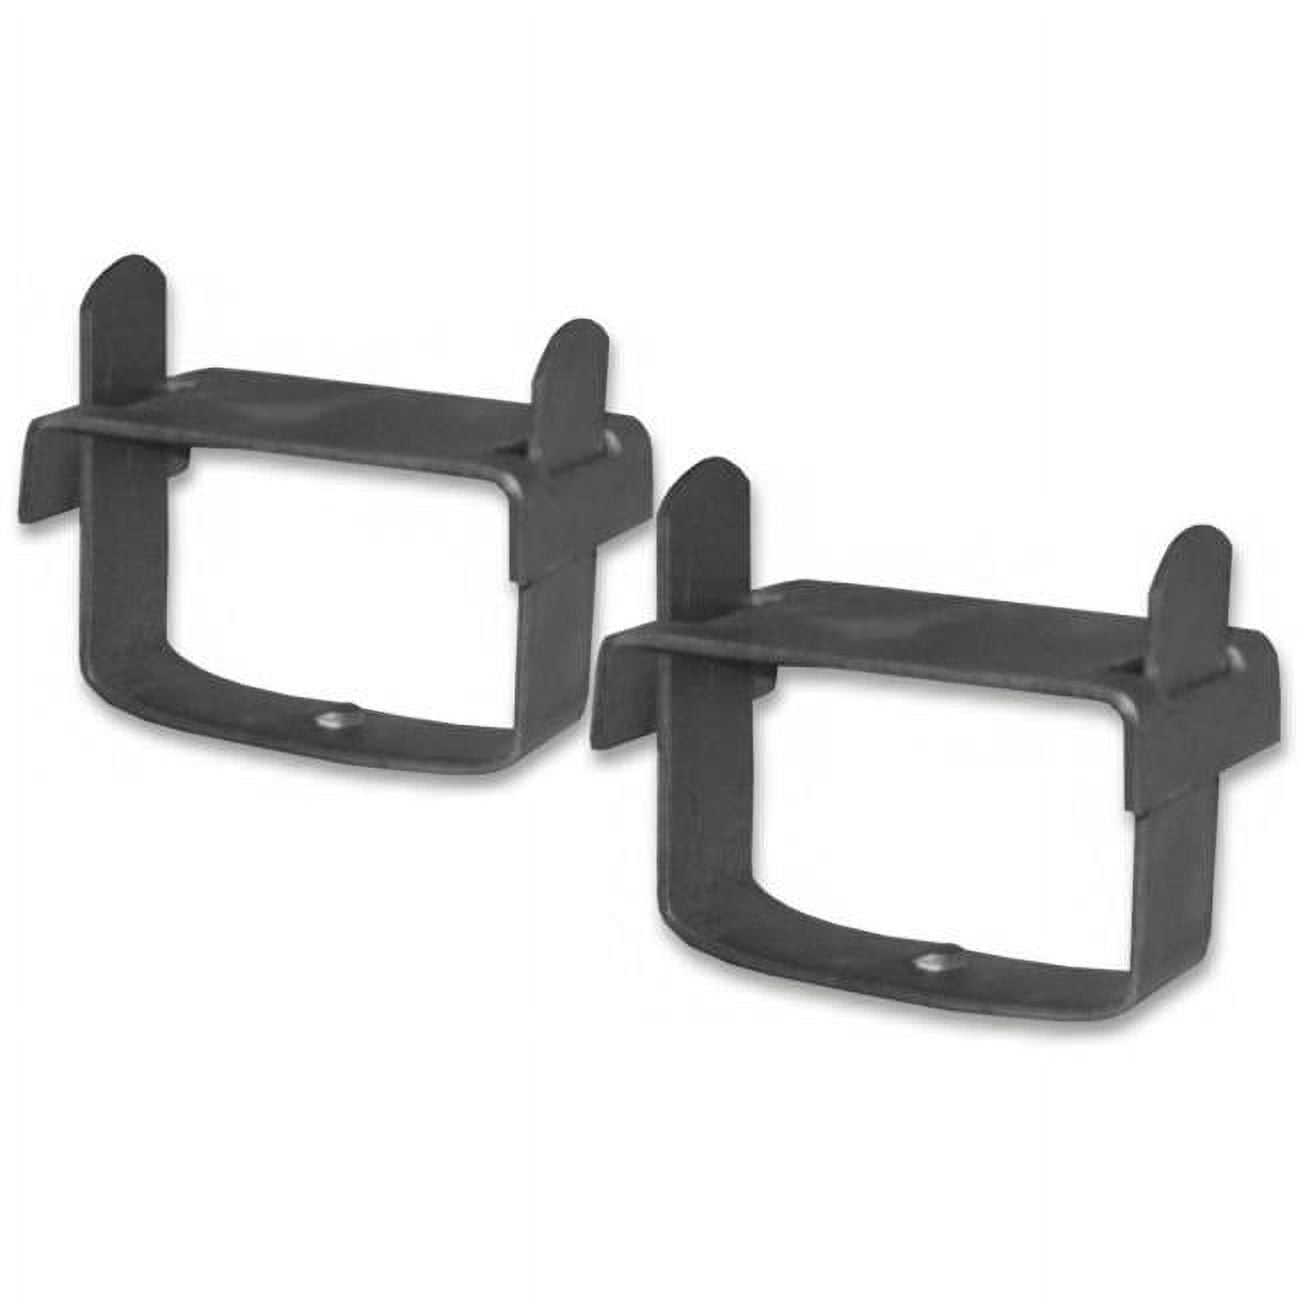 Picture of Billet4X4 LSC043-2 3 in. Axle Leaf Spring Clamps - 4X4 Off-Road Vehicles - Set of 4